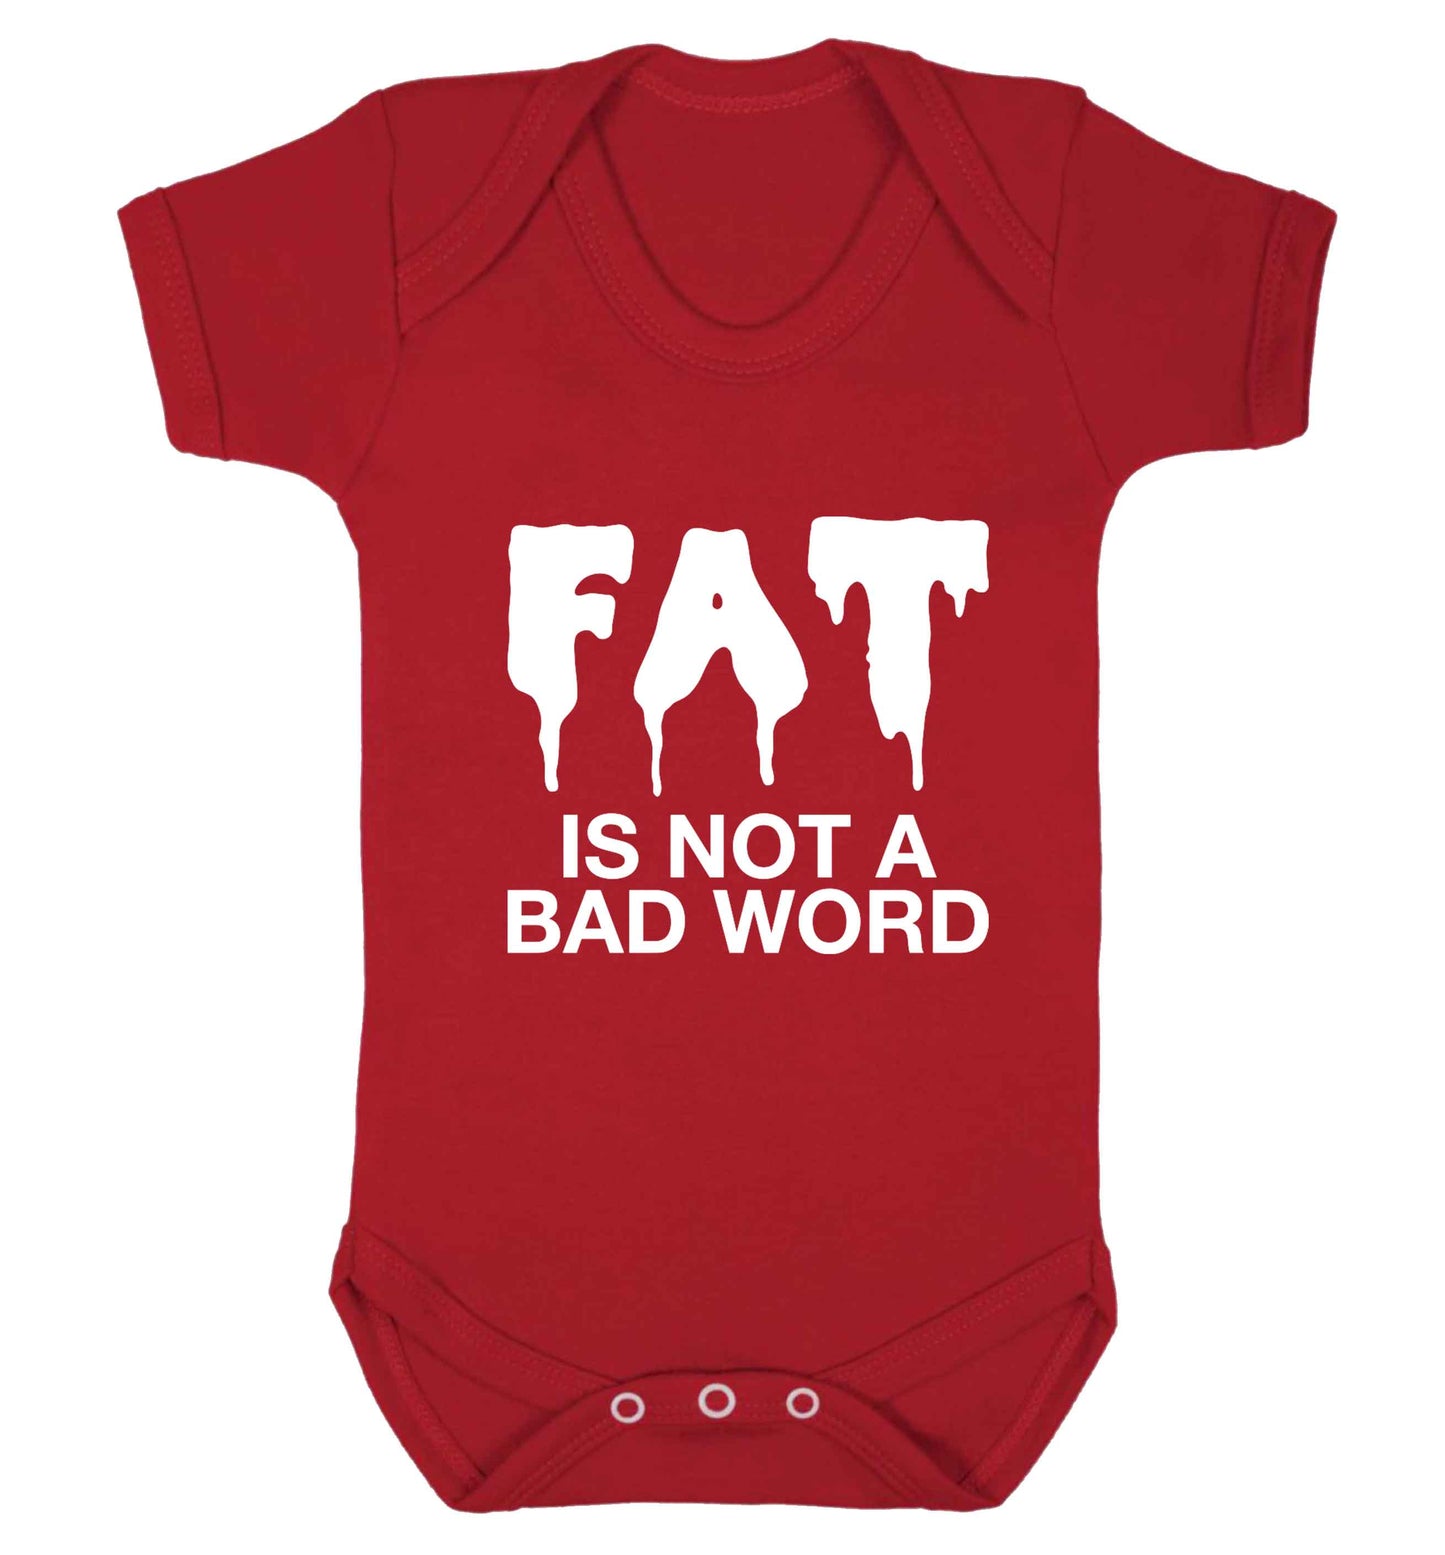 Fat is not a bad word baby vest red 18-24 months